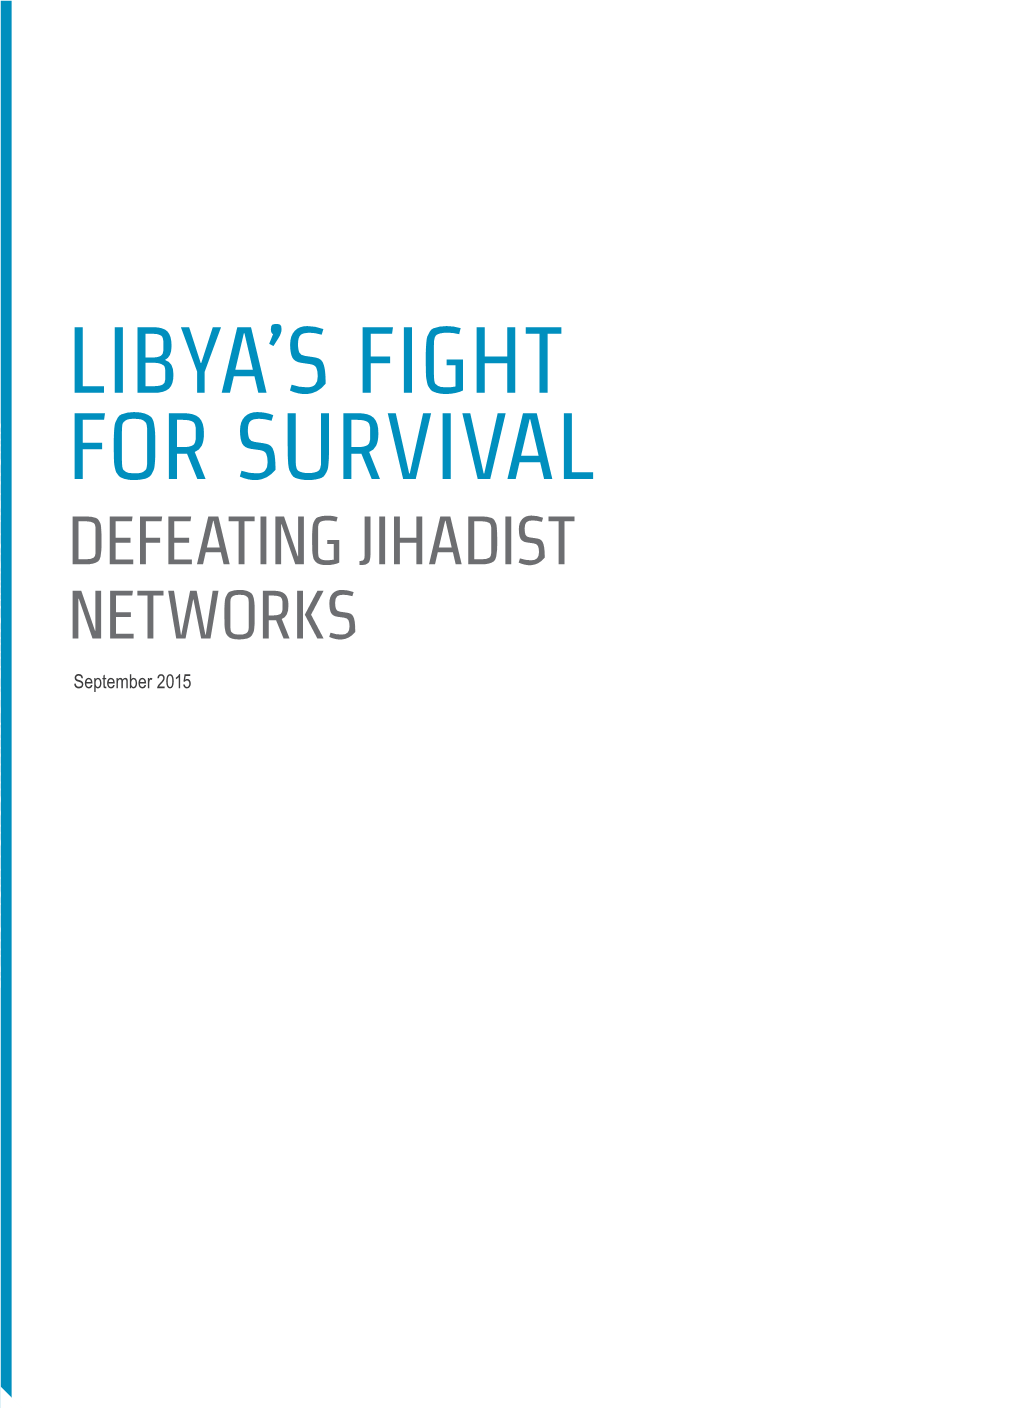 Libya's Fight for Survival